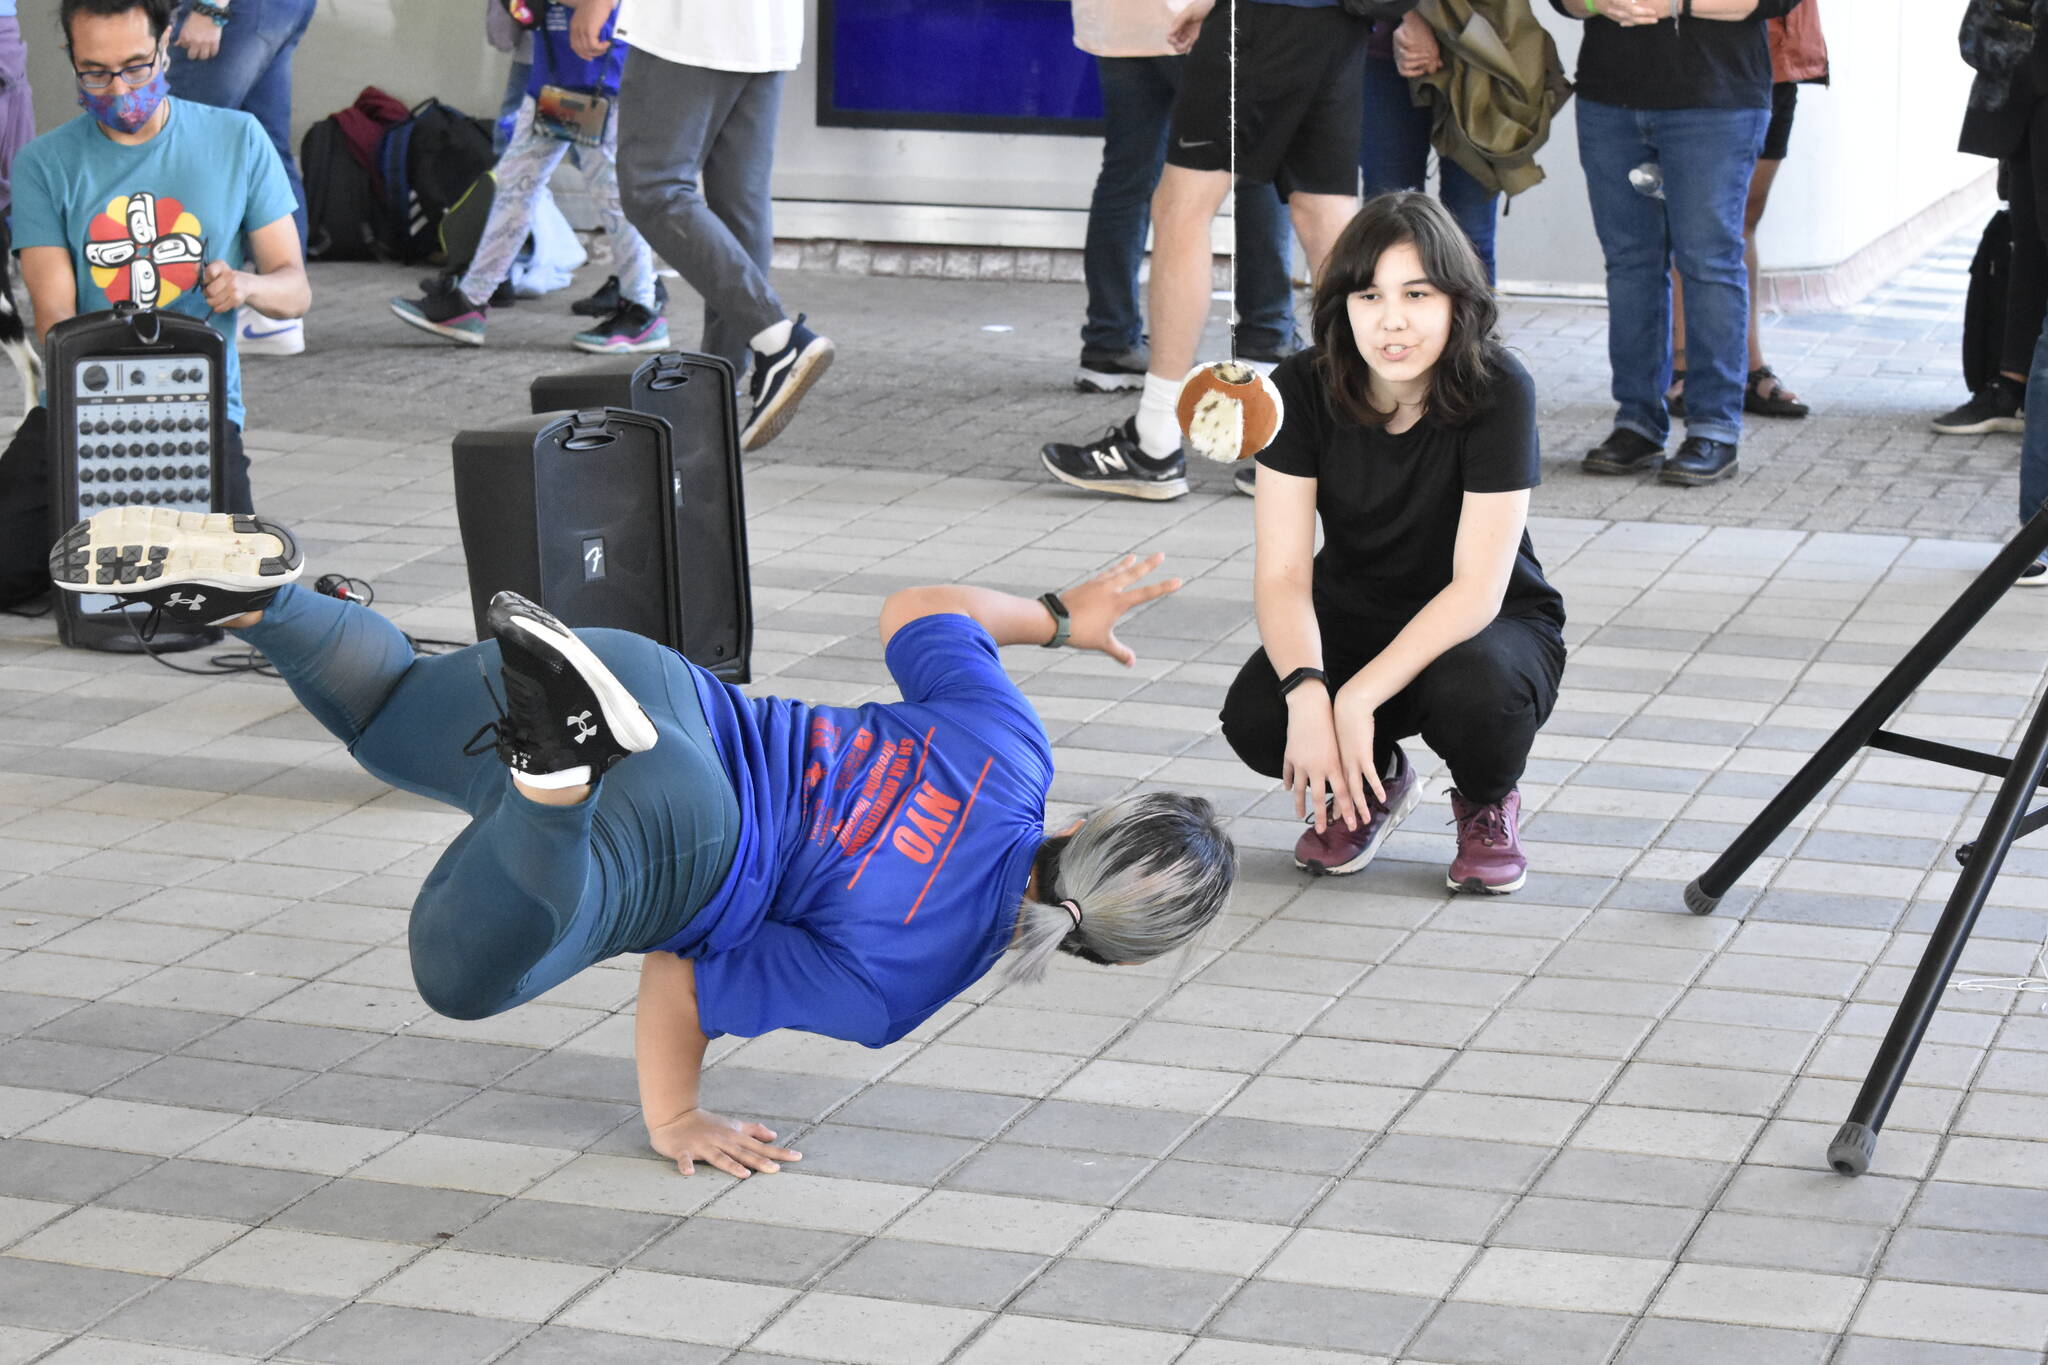 Lyric Ashenfelter attempts to grab a ball while balancing on her other hand while her traditional games teammate Simone Rabung watches during a demonstration of traditional Arctic games at the Sealaska Arts Campus on Thursday, June 8, 2022.